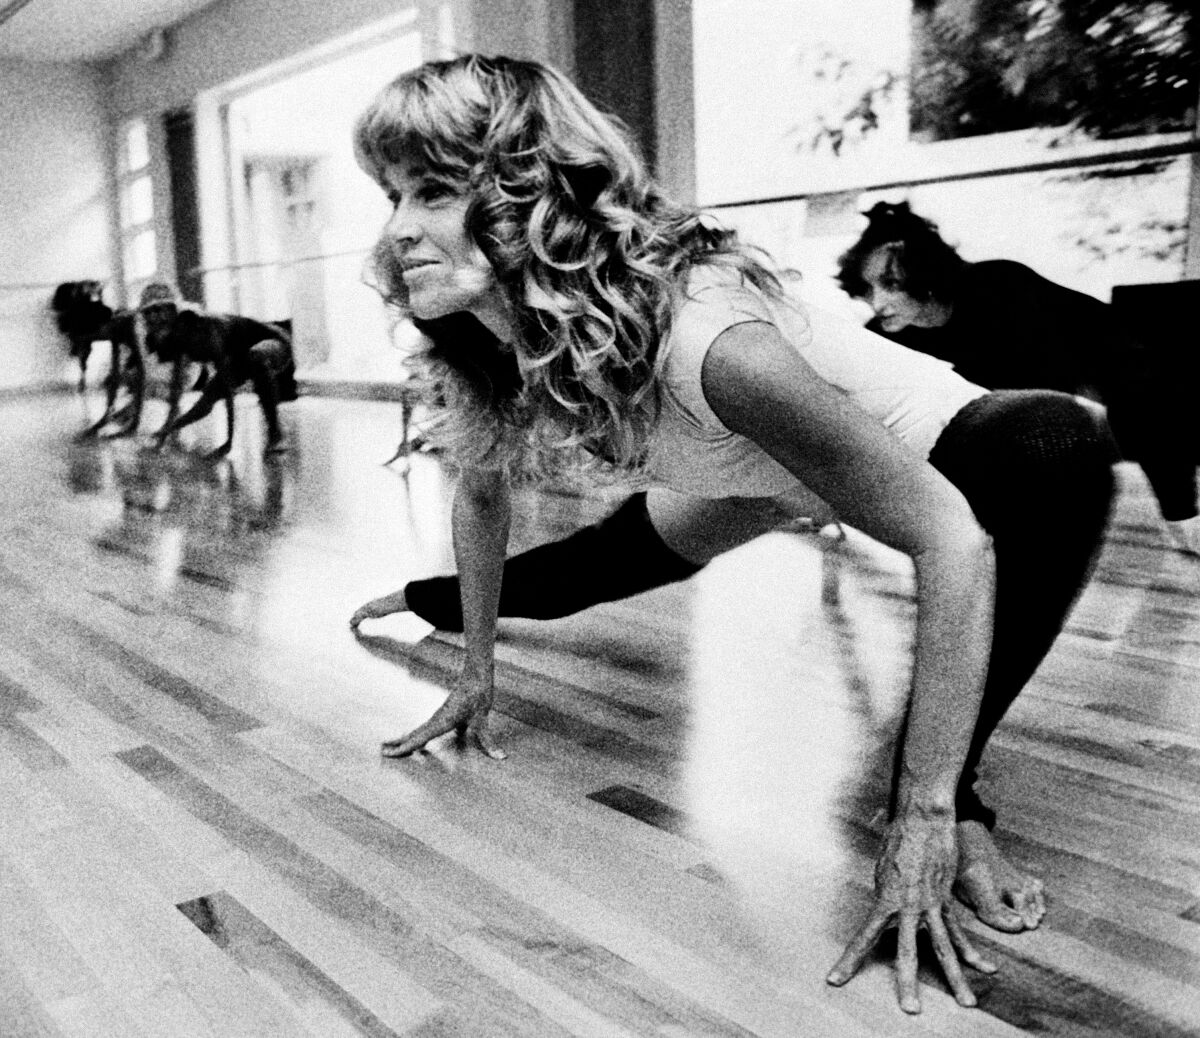 Actress Jane Fonda exercises dressed in a leotard exercises in a black and white photo